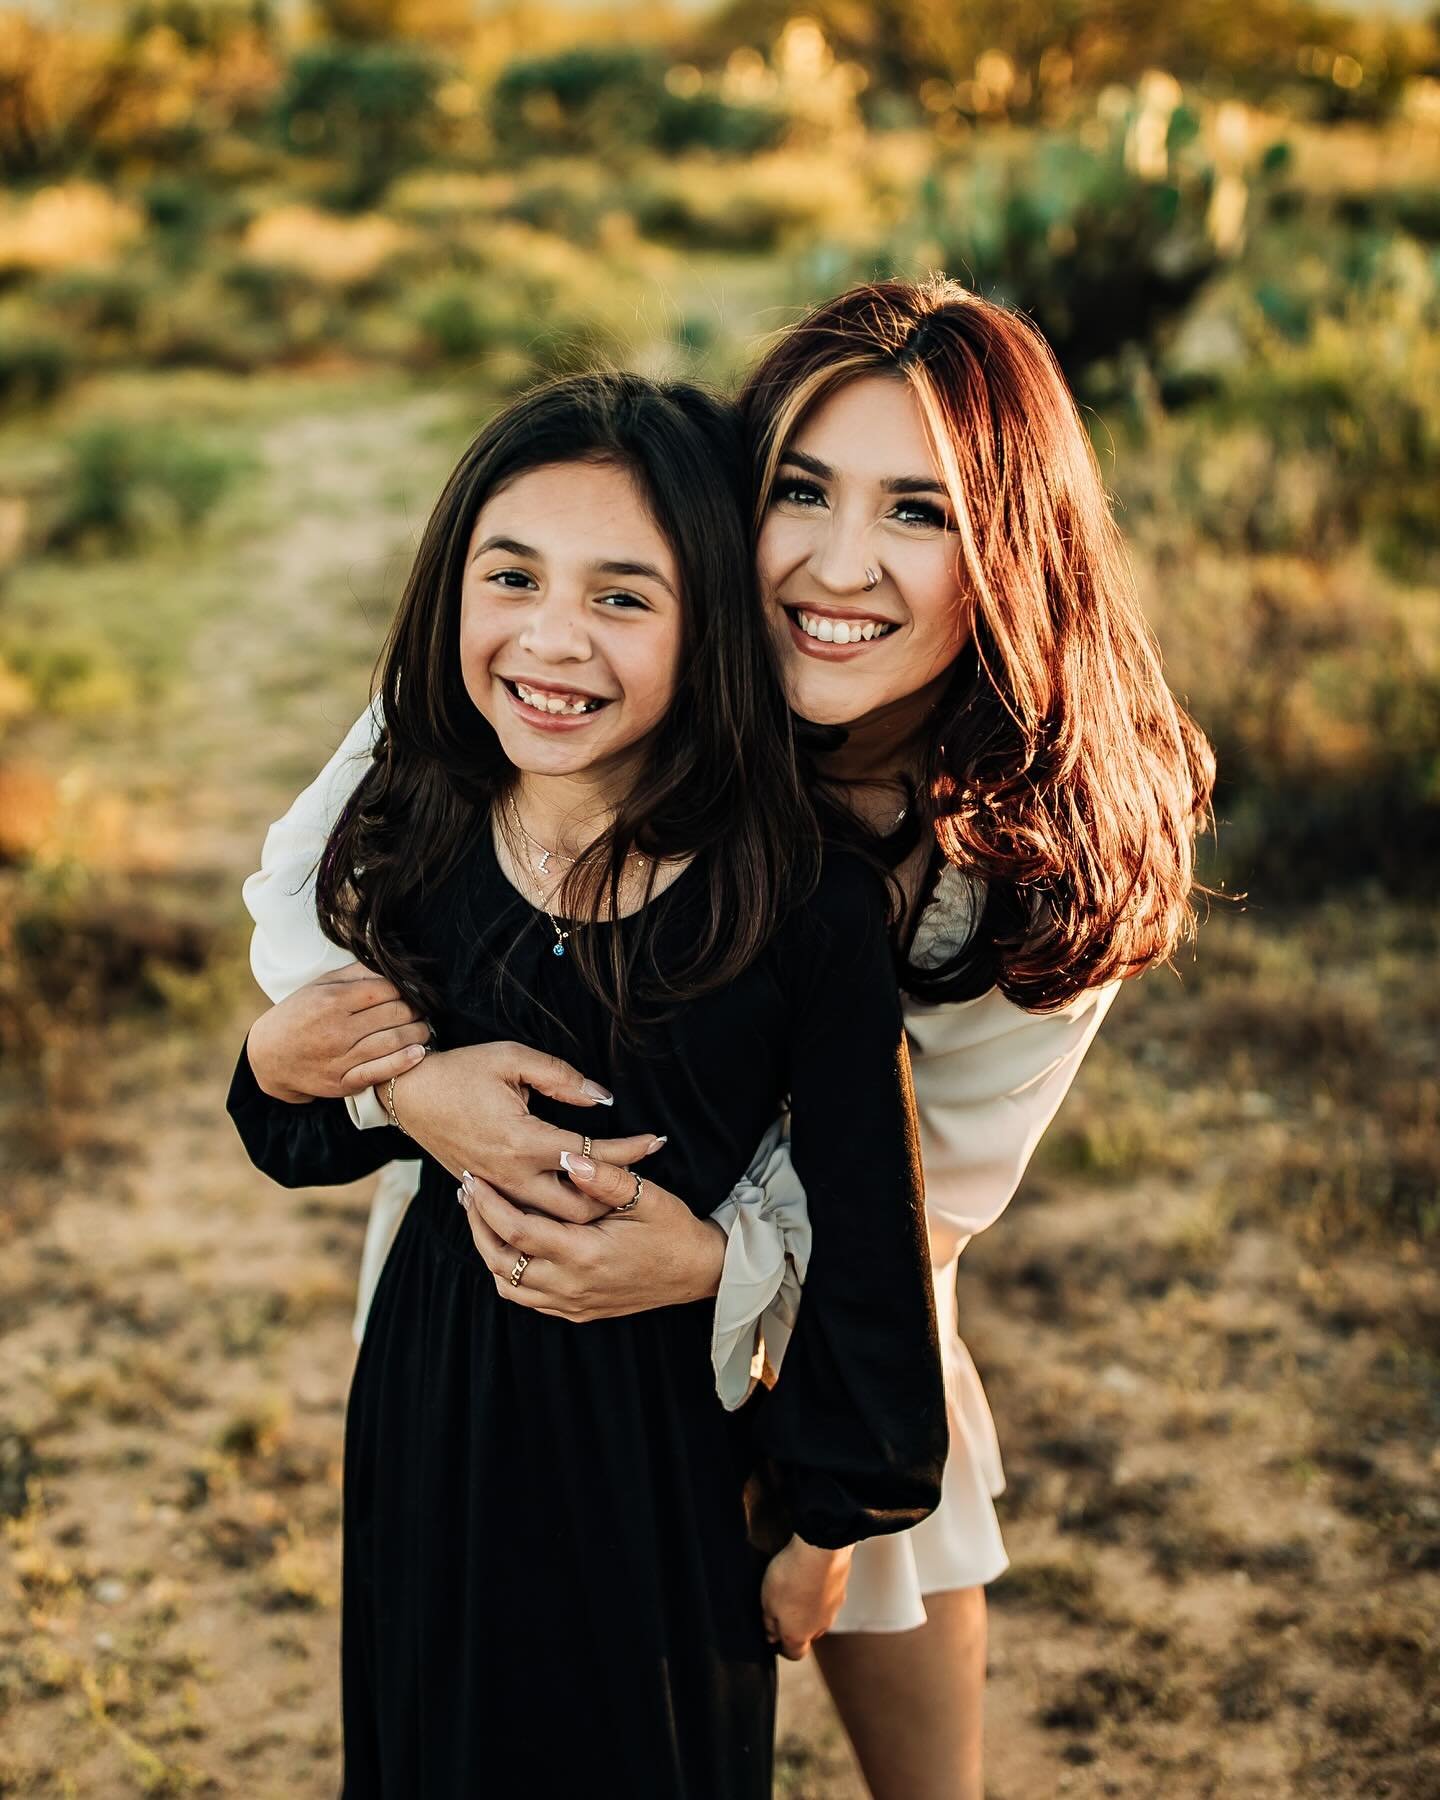 HAPPY MOTHERS DAY!
I work hard every single day for this little girl right here! She is who keeps me going even when I think I can't! A mommas love is so powerful🥰🫶🏼🥹

I'm so glad I did a mommy and me shoot! 
Thank you @juliahausphoto for capturi